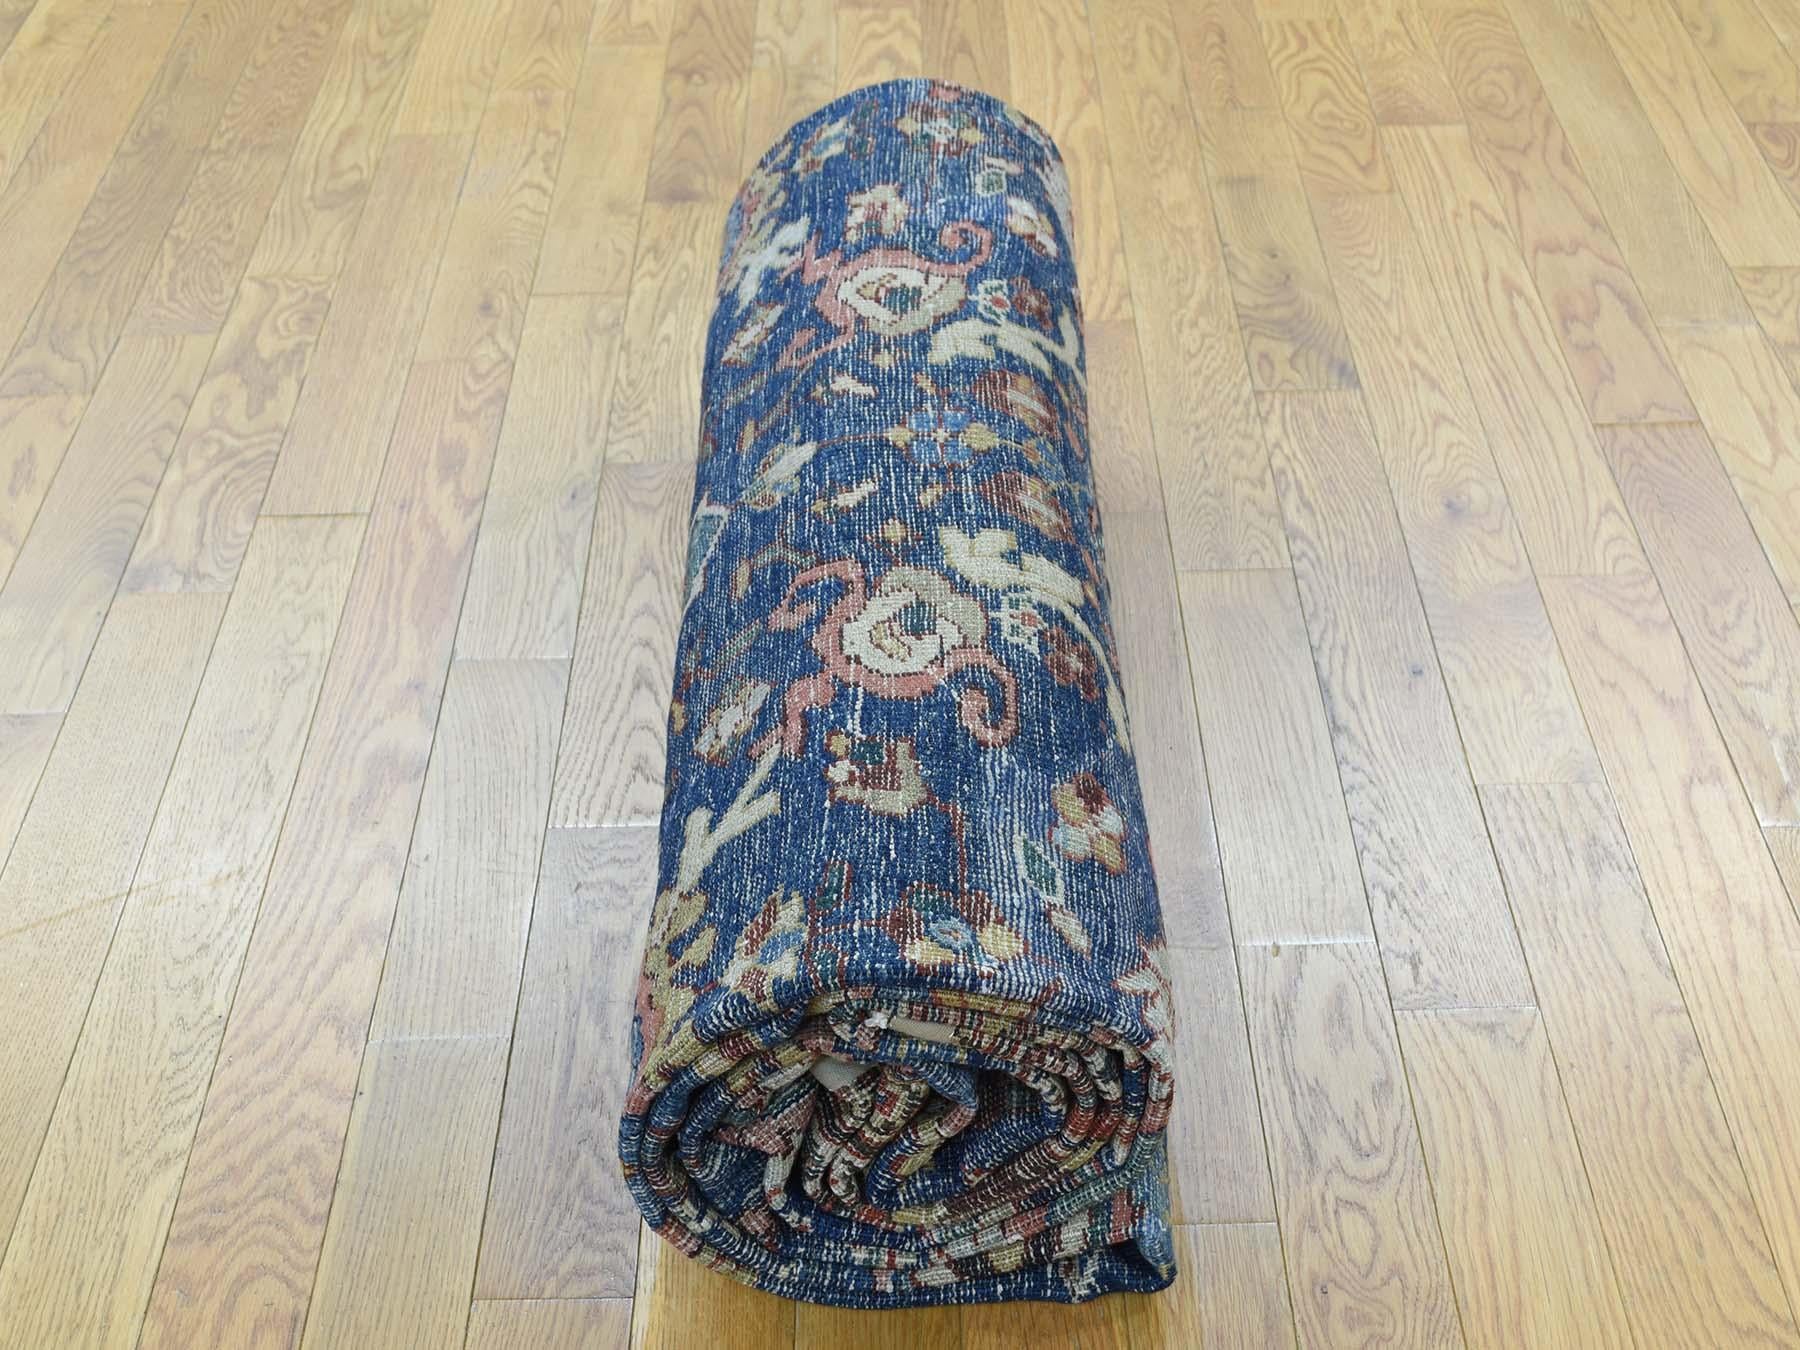 This is a genuine hand knotted Oriental rug. It is not hand tufted or machine made rug. Our entire inventory is made of either hand knotted or handwoven rugs.

Adorn your house style with this splendid hand knotted carpet. This handcrafted antique